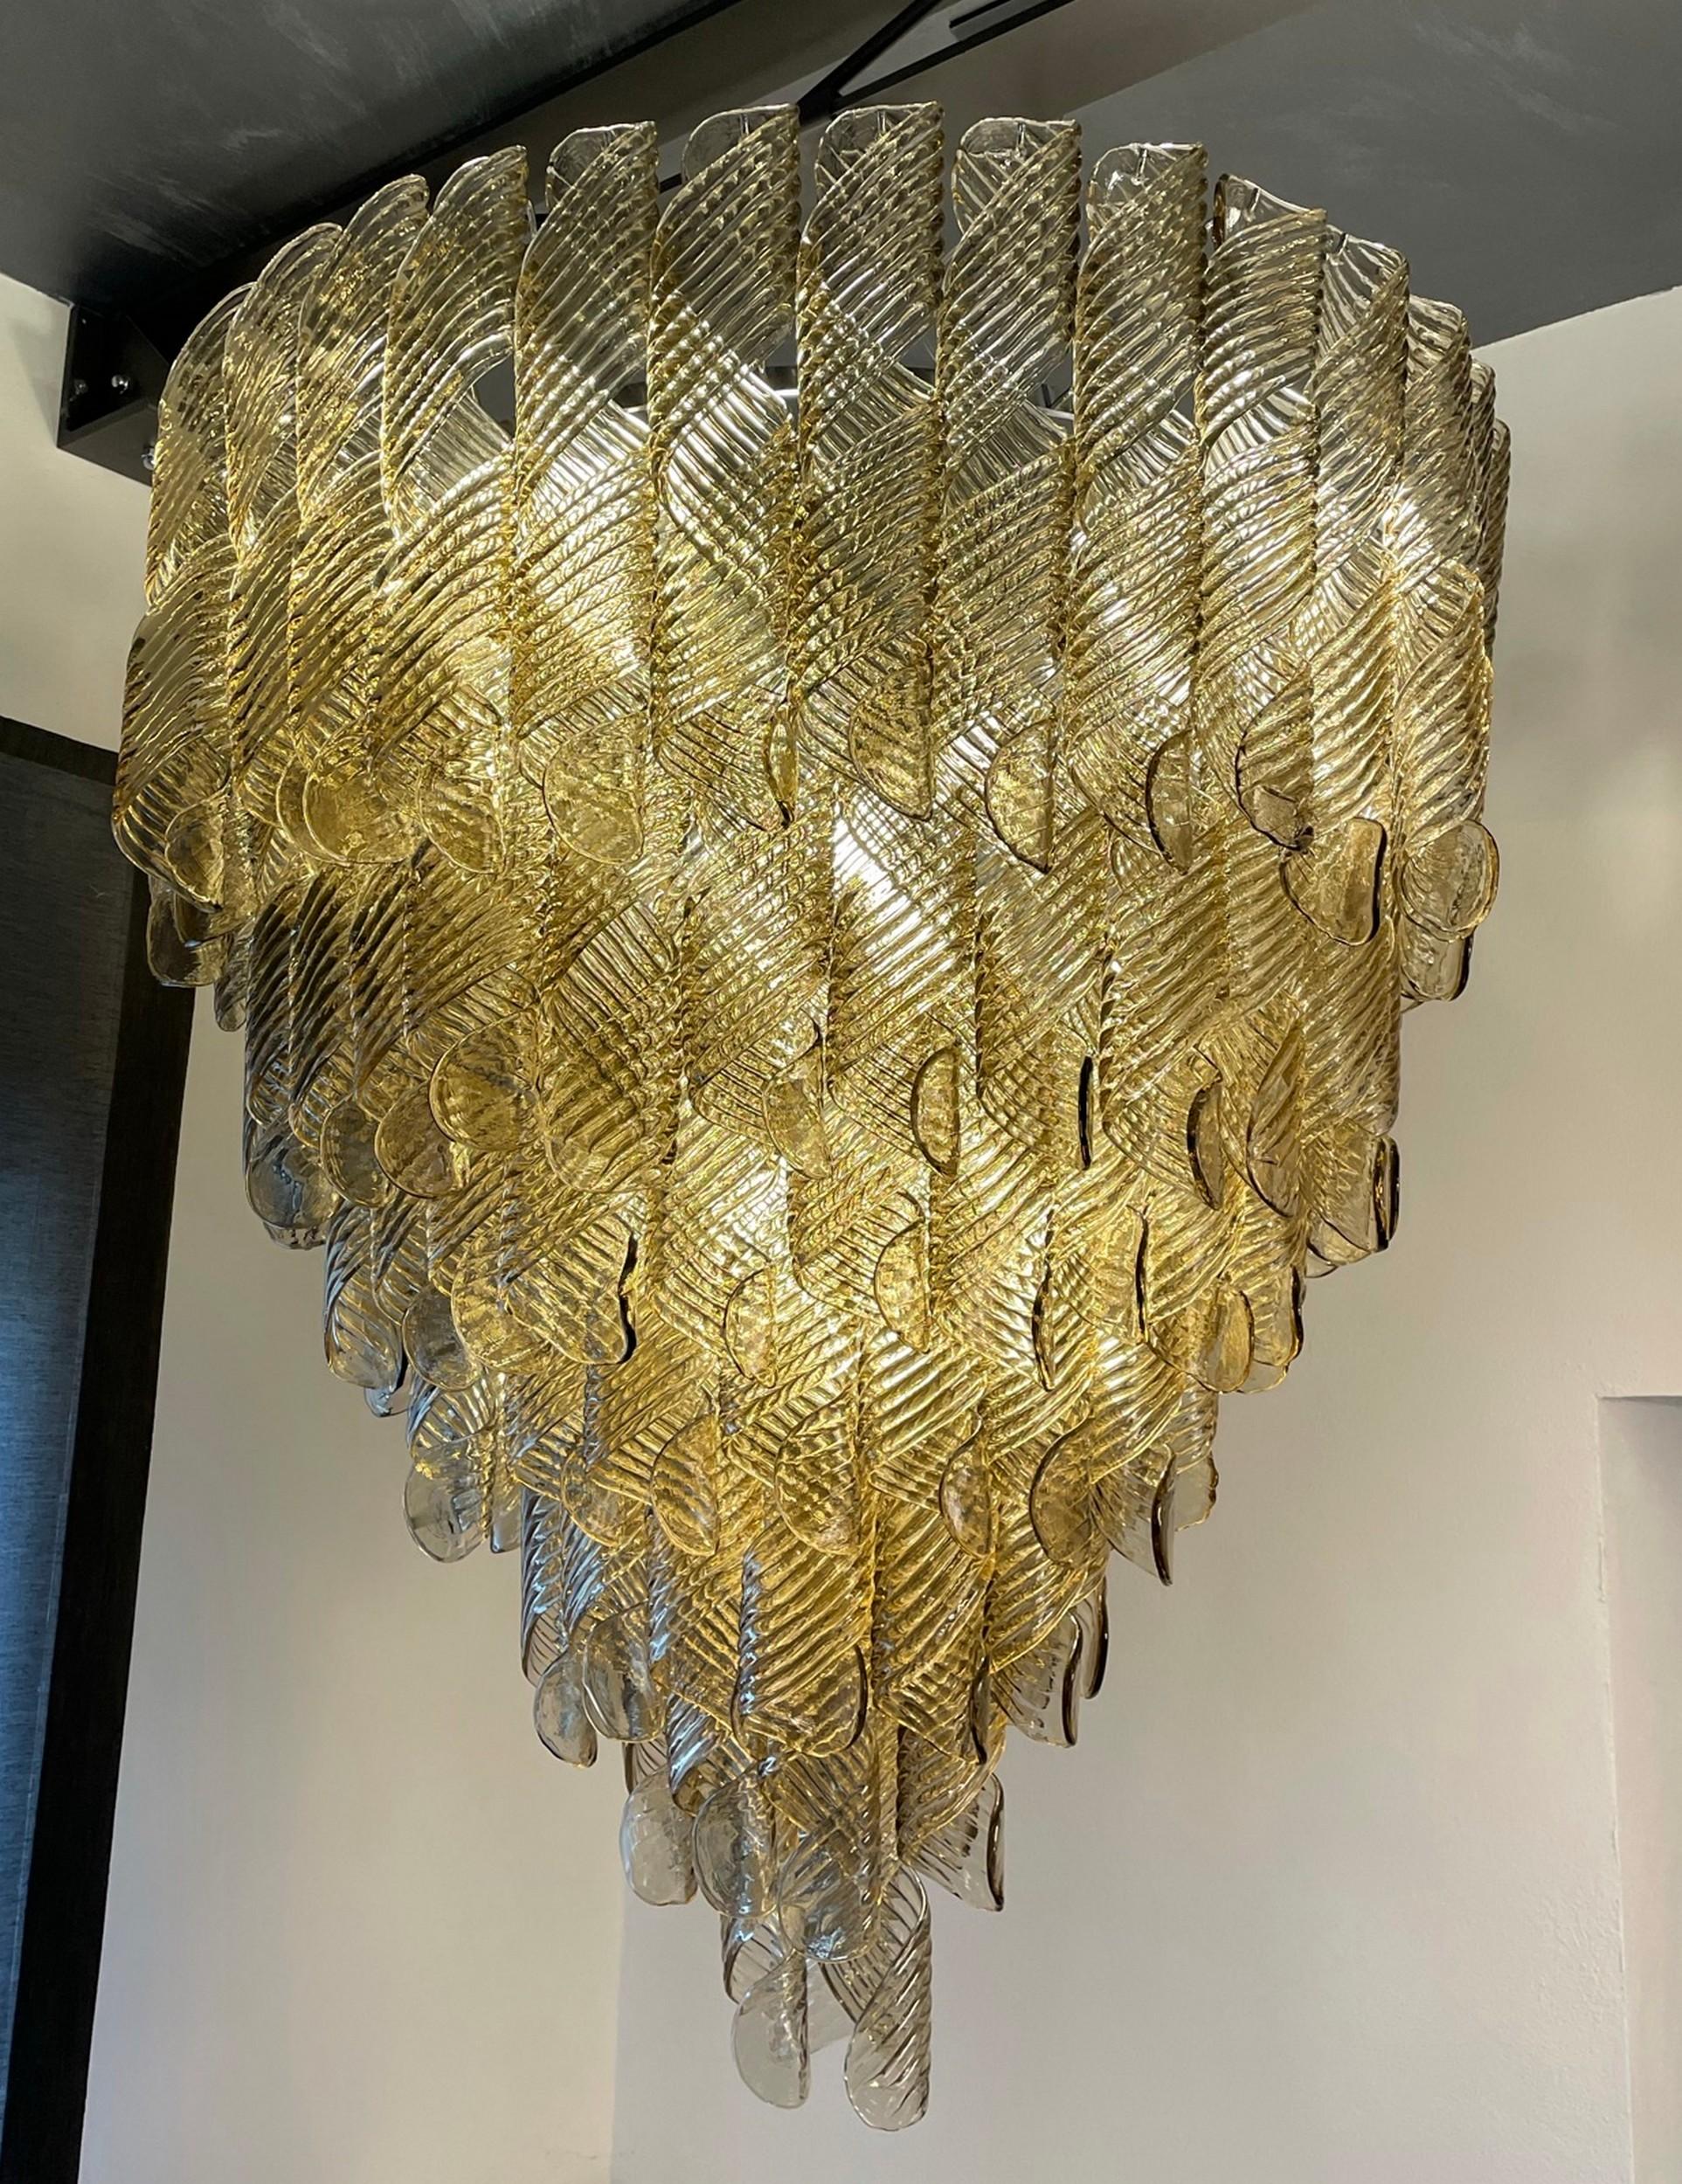 Mid-Century Modern Monumental Chandelier, Murano Fume Glass in Spiral Ribbed Elements, 7 Tiers